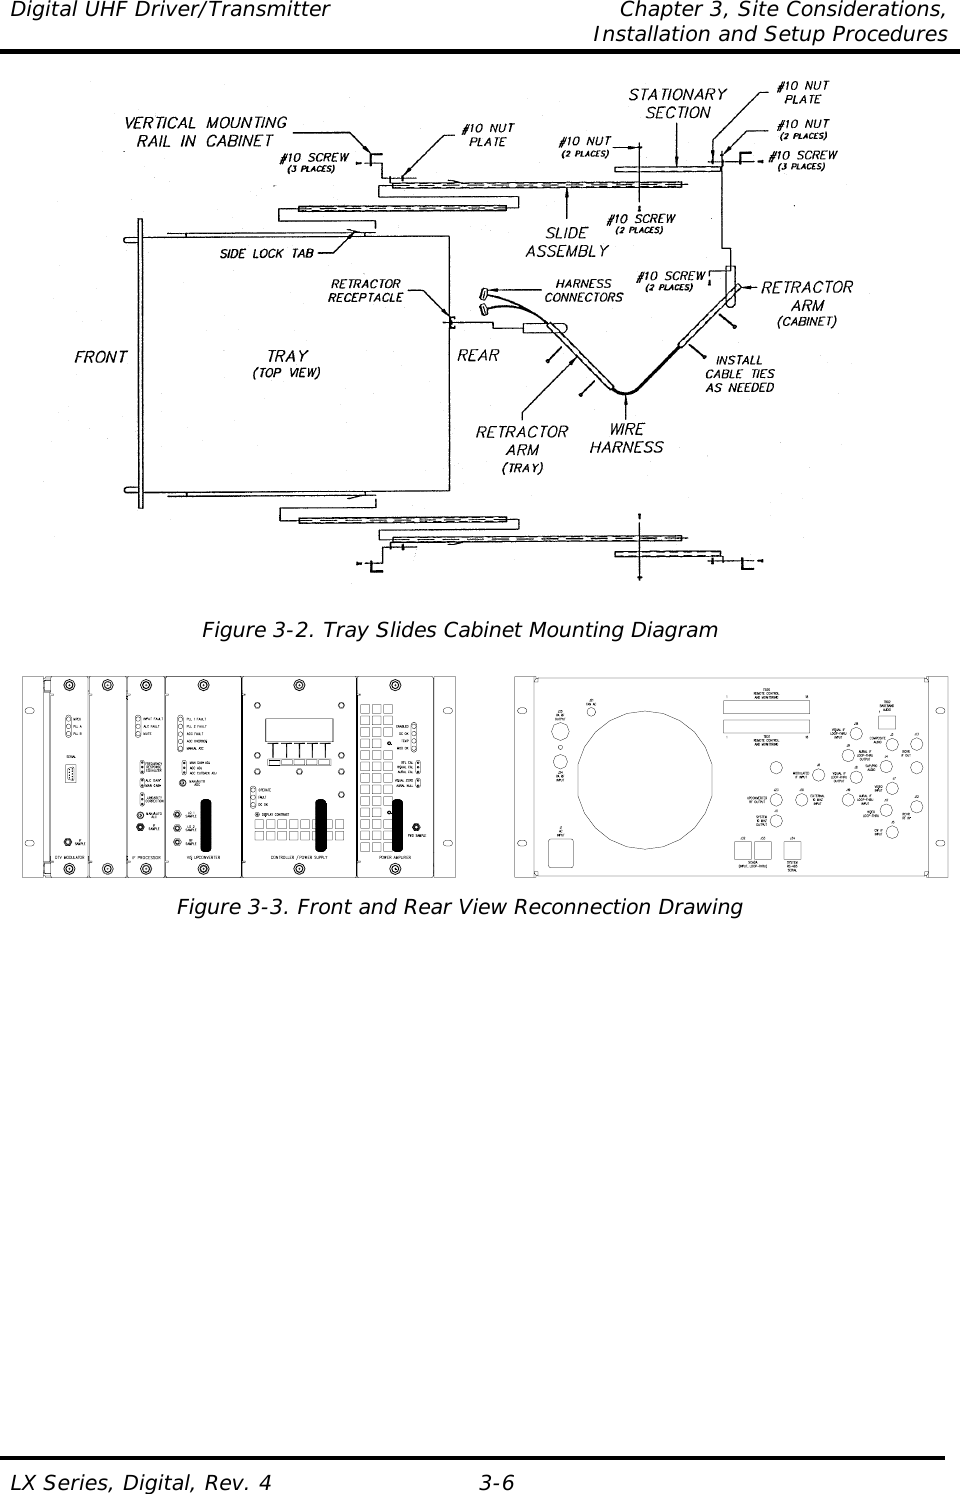 Digital UHF Driver/Transmitter  Chapter 3, Site Considerations,    Installation and Setup Procedures  LX Series, Digital, Rev. 4 3-6   Figure 3-2. Tray Slides Cabinet Mounting Diagram   Figure 3-3. Front and Rear View Reconnection Drawing   